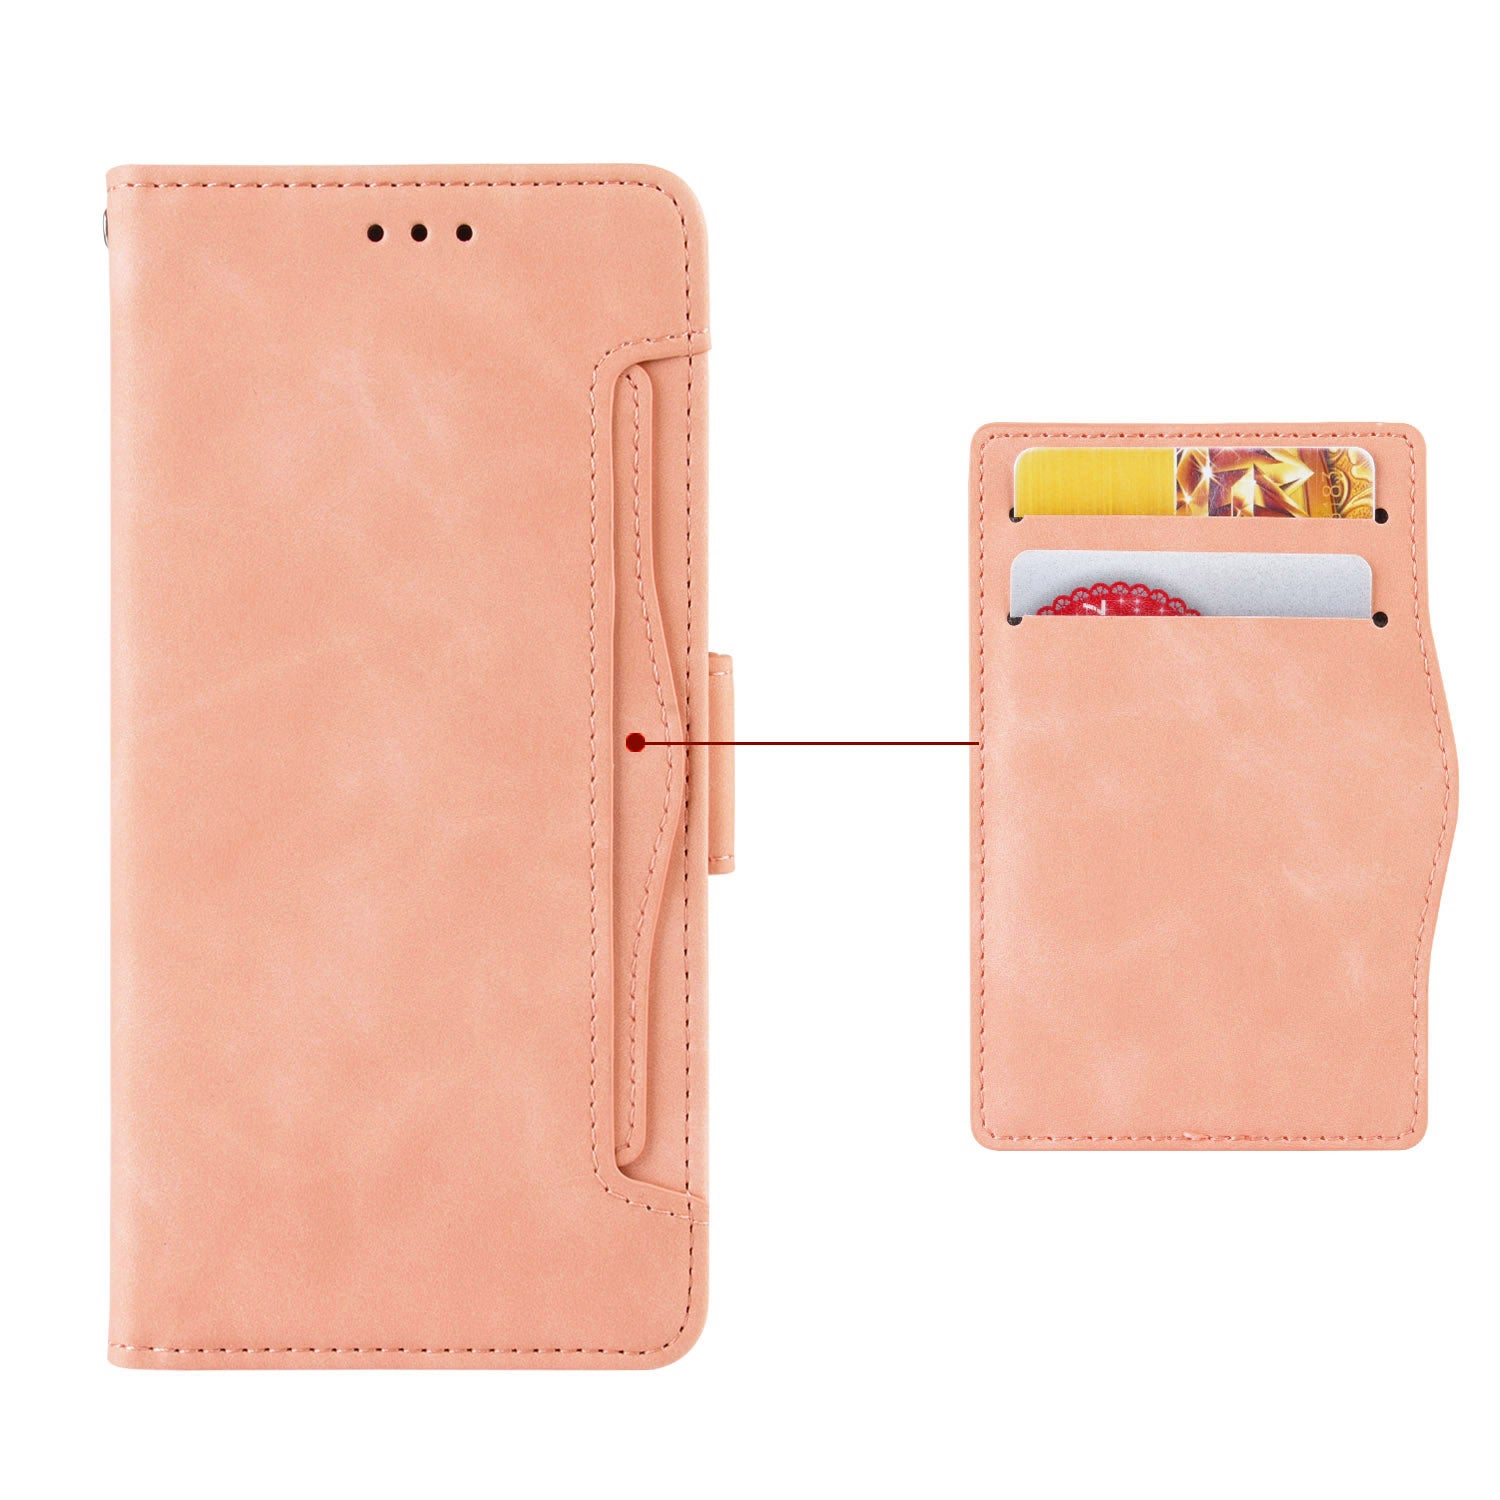 Uniqkart for Blackview Oscal C30 / Oscal C30 Pro Multiple Card Slots PU Leather Case Wallet Phone Stand Cover - Pink